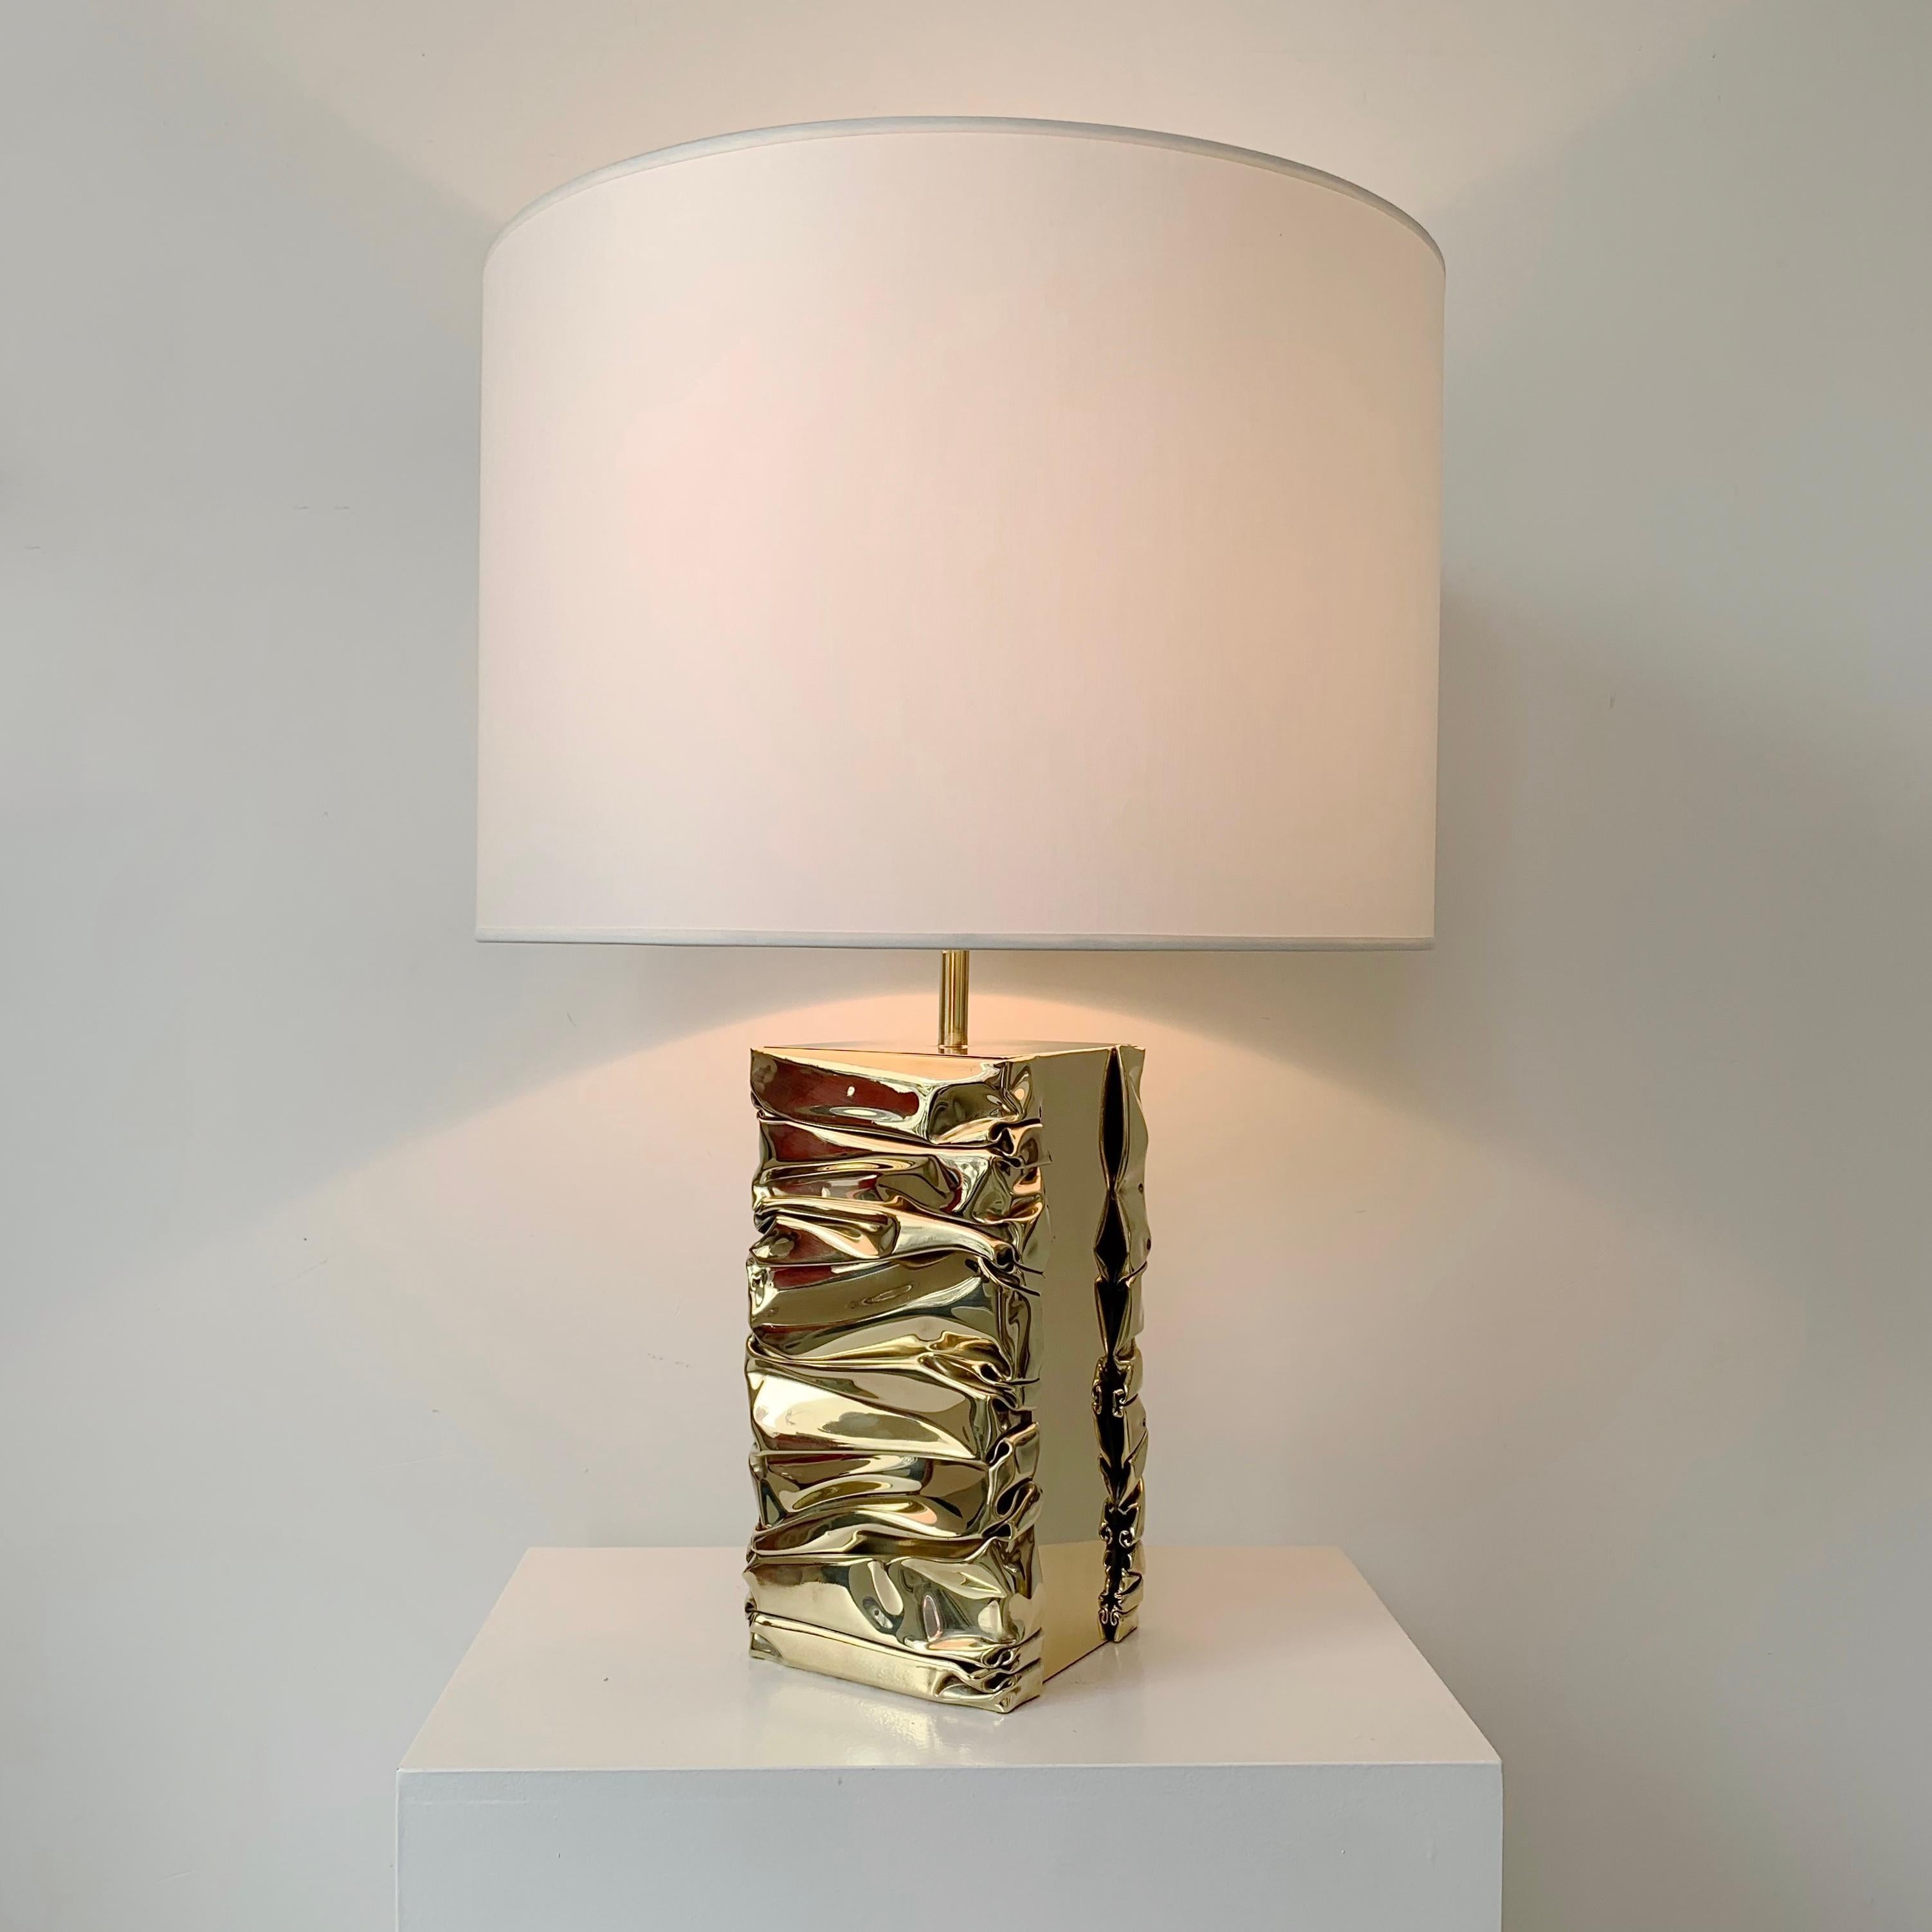 Jacques Moniquet Signed Brass Table Lamp, circa 1975, France. For Sale 8